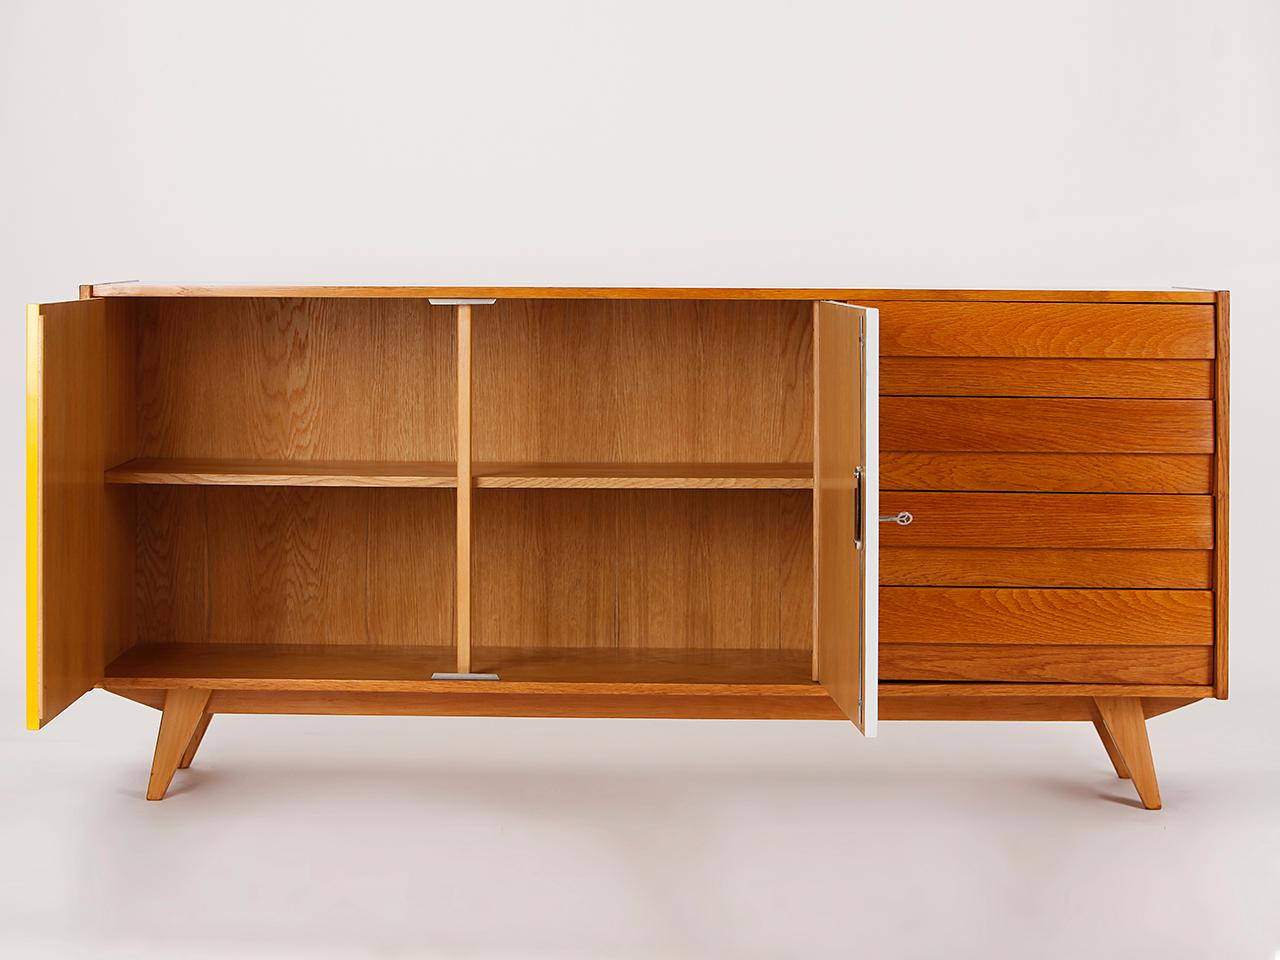 This model U-460 sideboard was designed by Jiri Jiroutek for Interier Praha in former Czechoslovakia. Produced in the 1960s.  Completely restored and repainted. Excellent condition. Delivery time 3-4 weeks.
